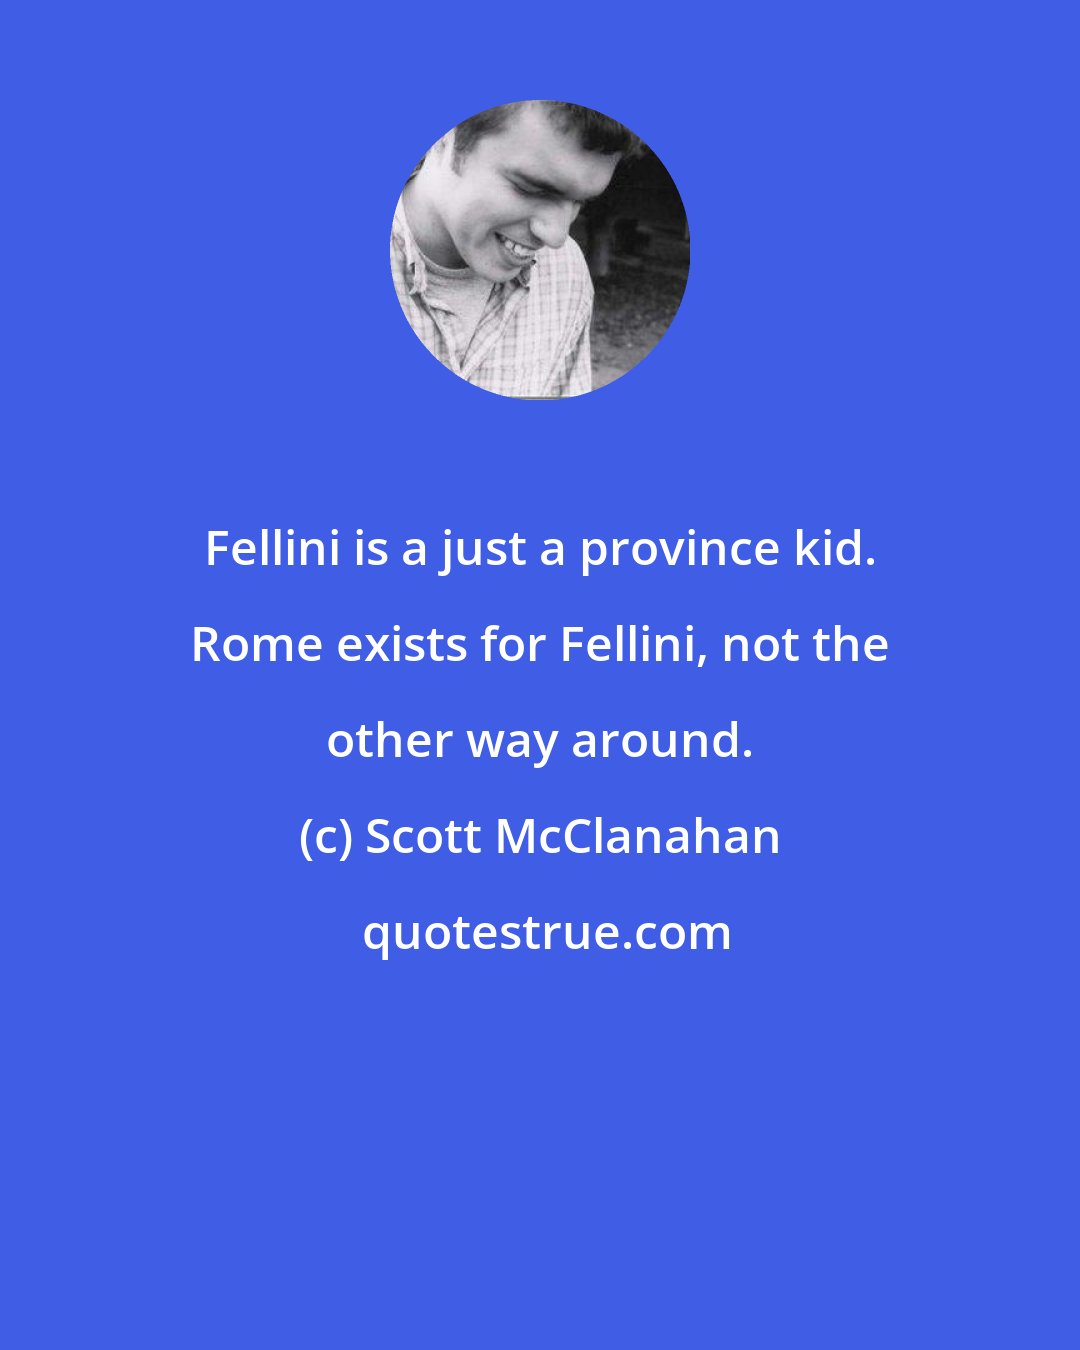 Scott McClanahan: Fellini is a just a province kid. Rome exists for Fellini, not the other way around.